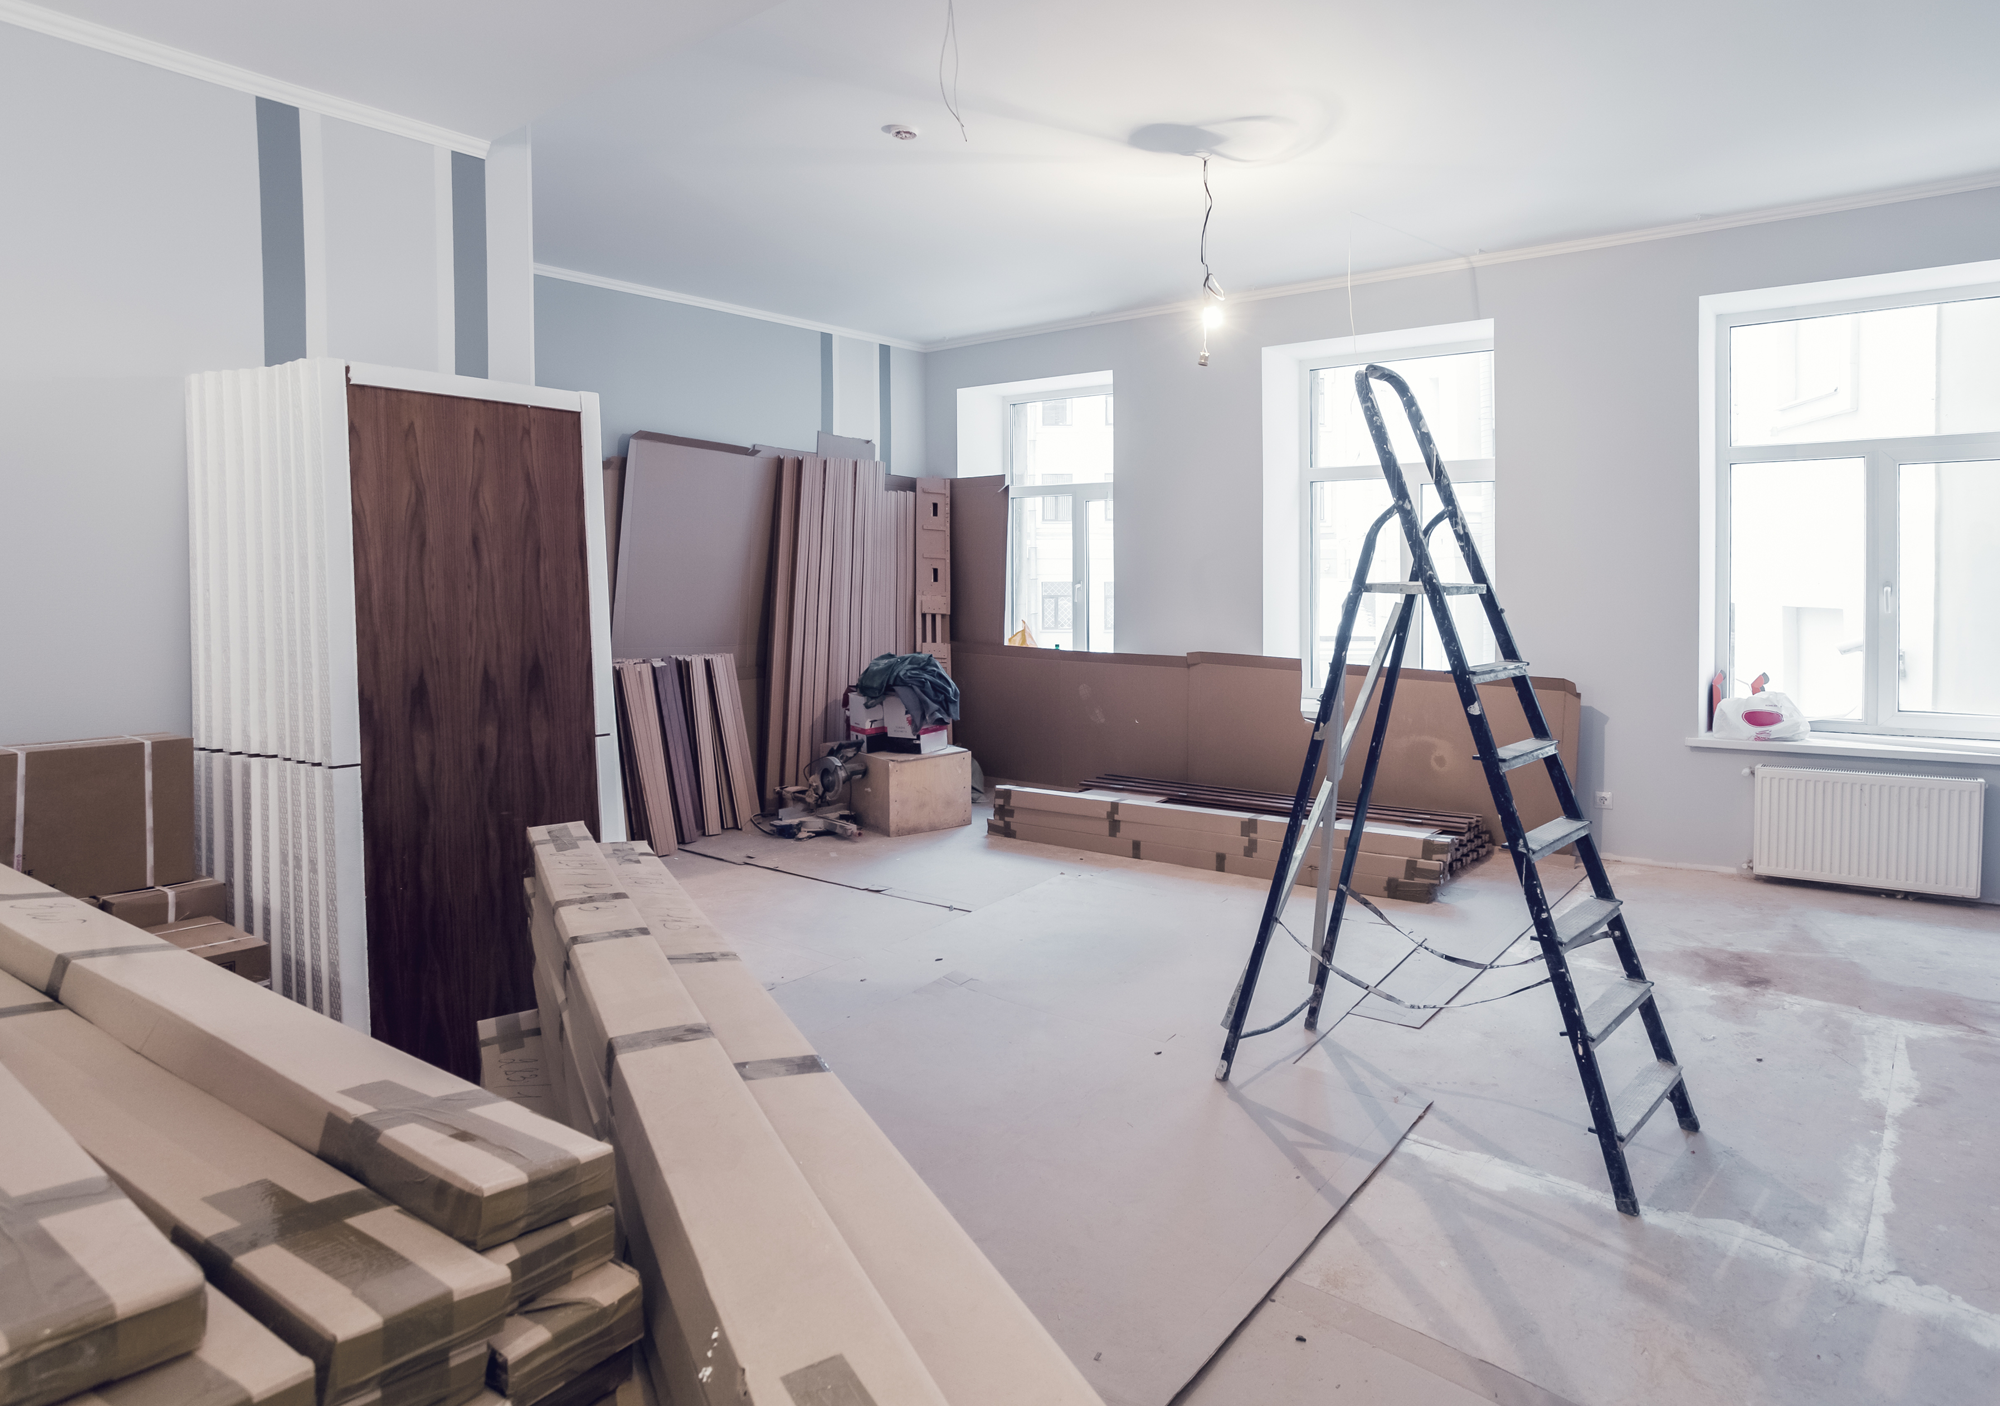 Creating a Quality Work Environment for your Contractor